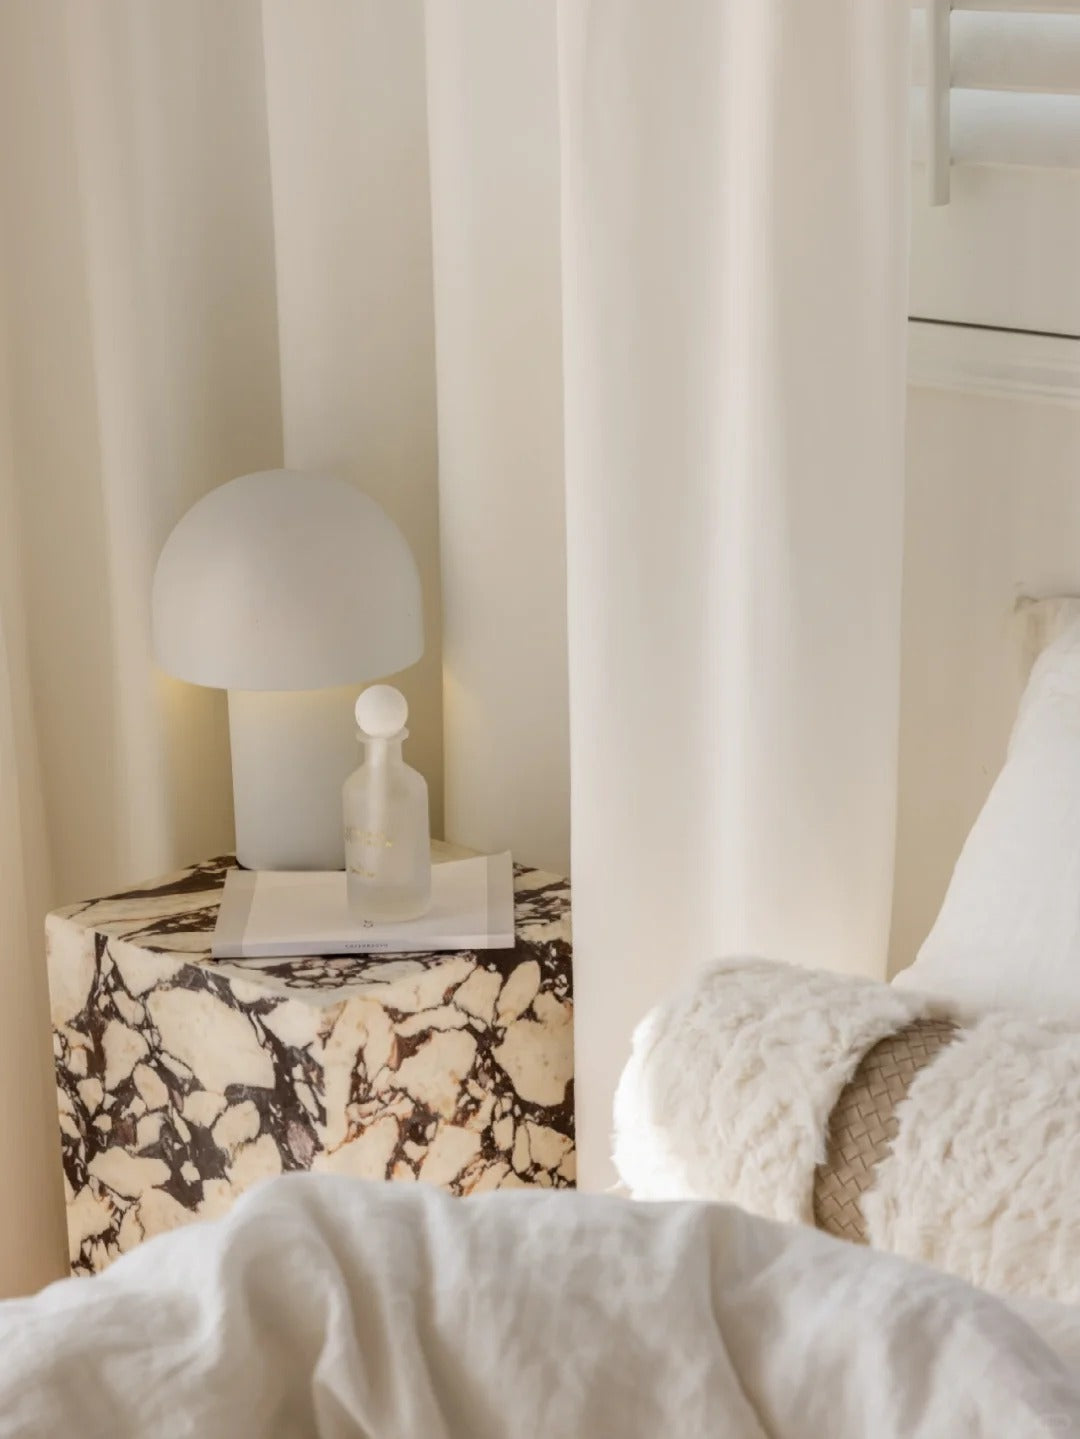 Elegant bedroom with white sheer curtain providing privacy, marble nightstand with modern lamp and cozy white blanket, emphasizing light penetration and room elegance